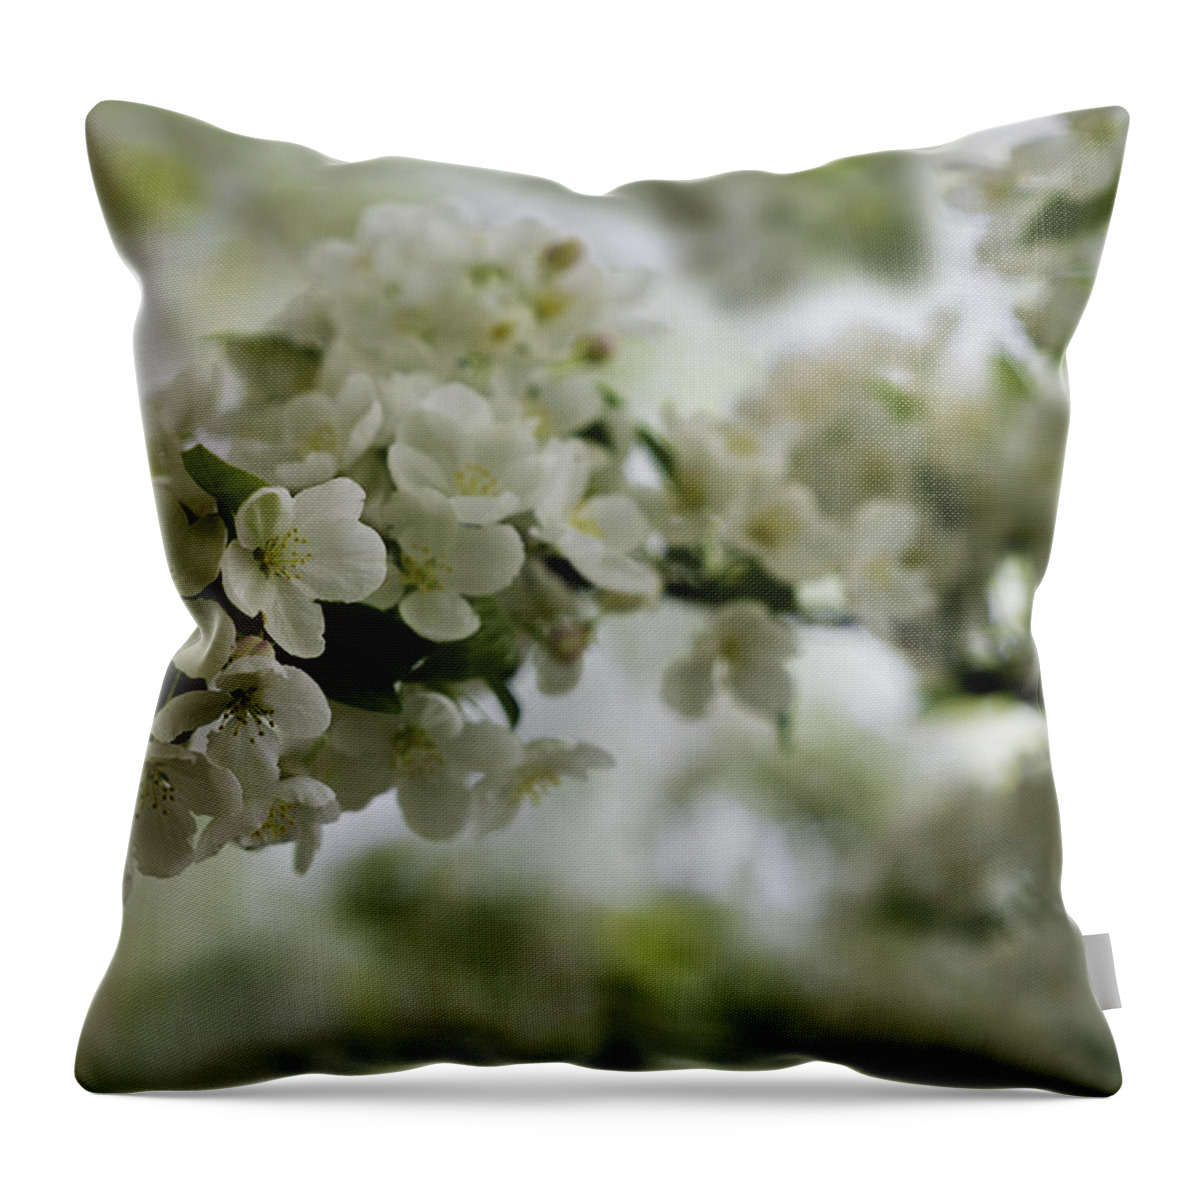 Blooming Throw Pillow featuring the photograph Spring Bloosom by Sebastian Musial